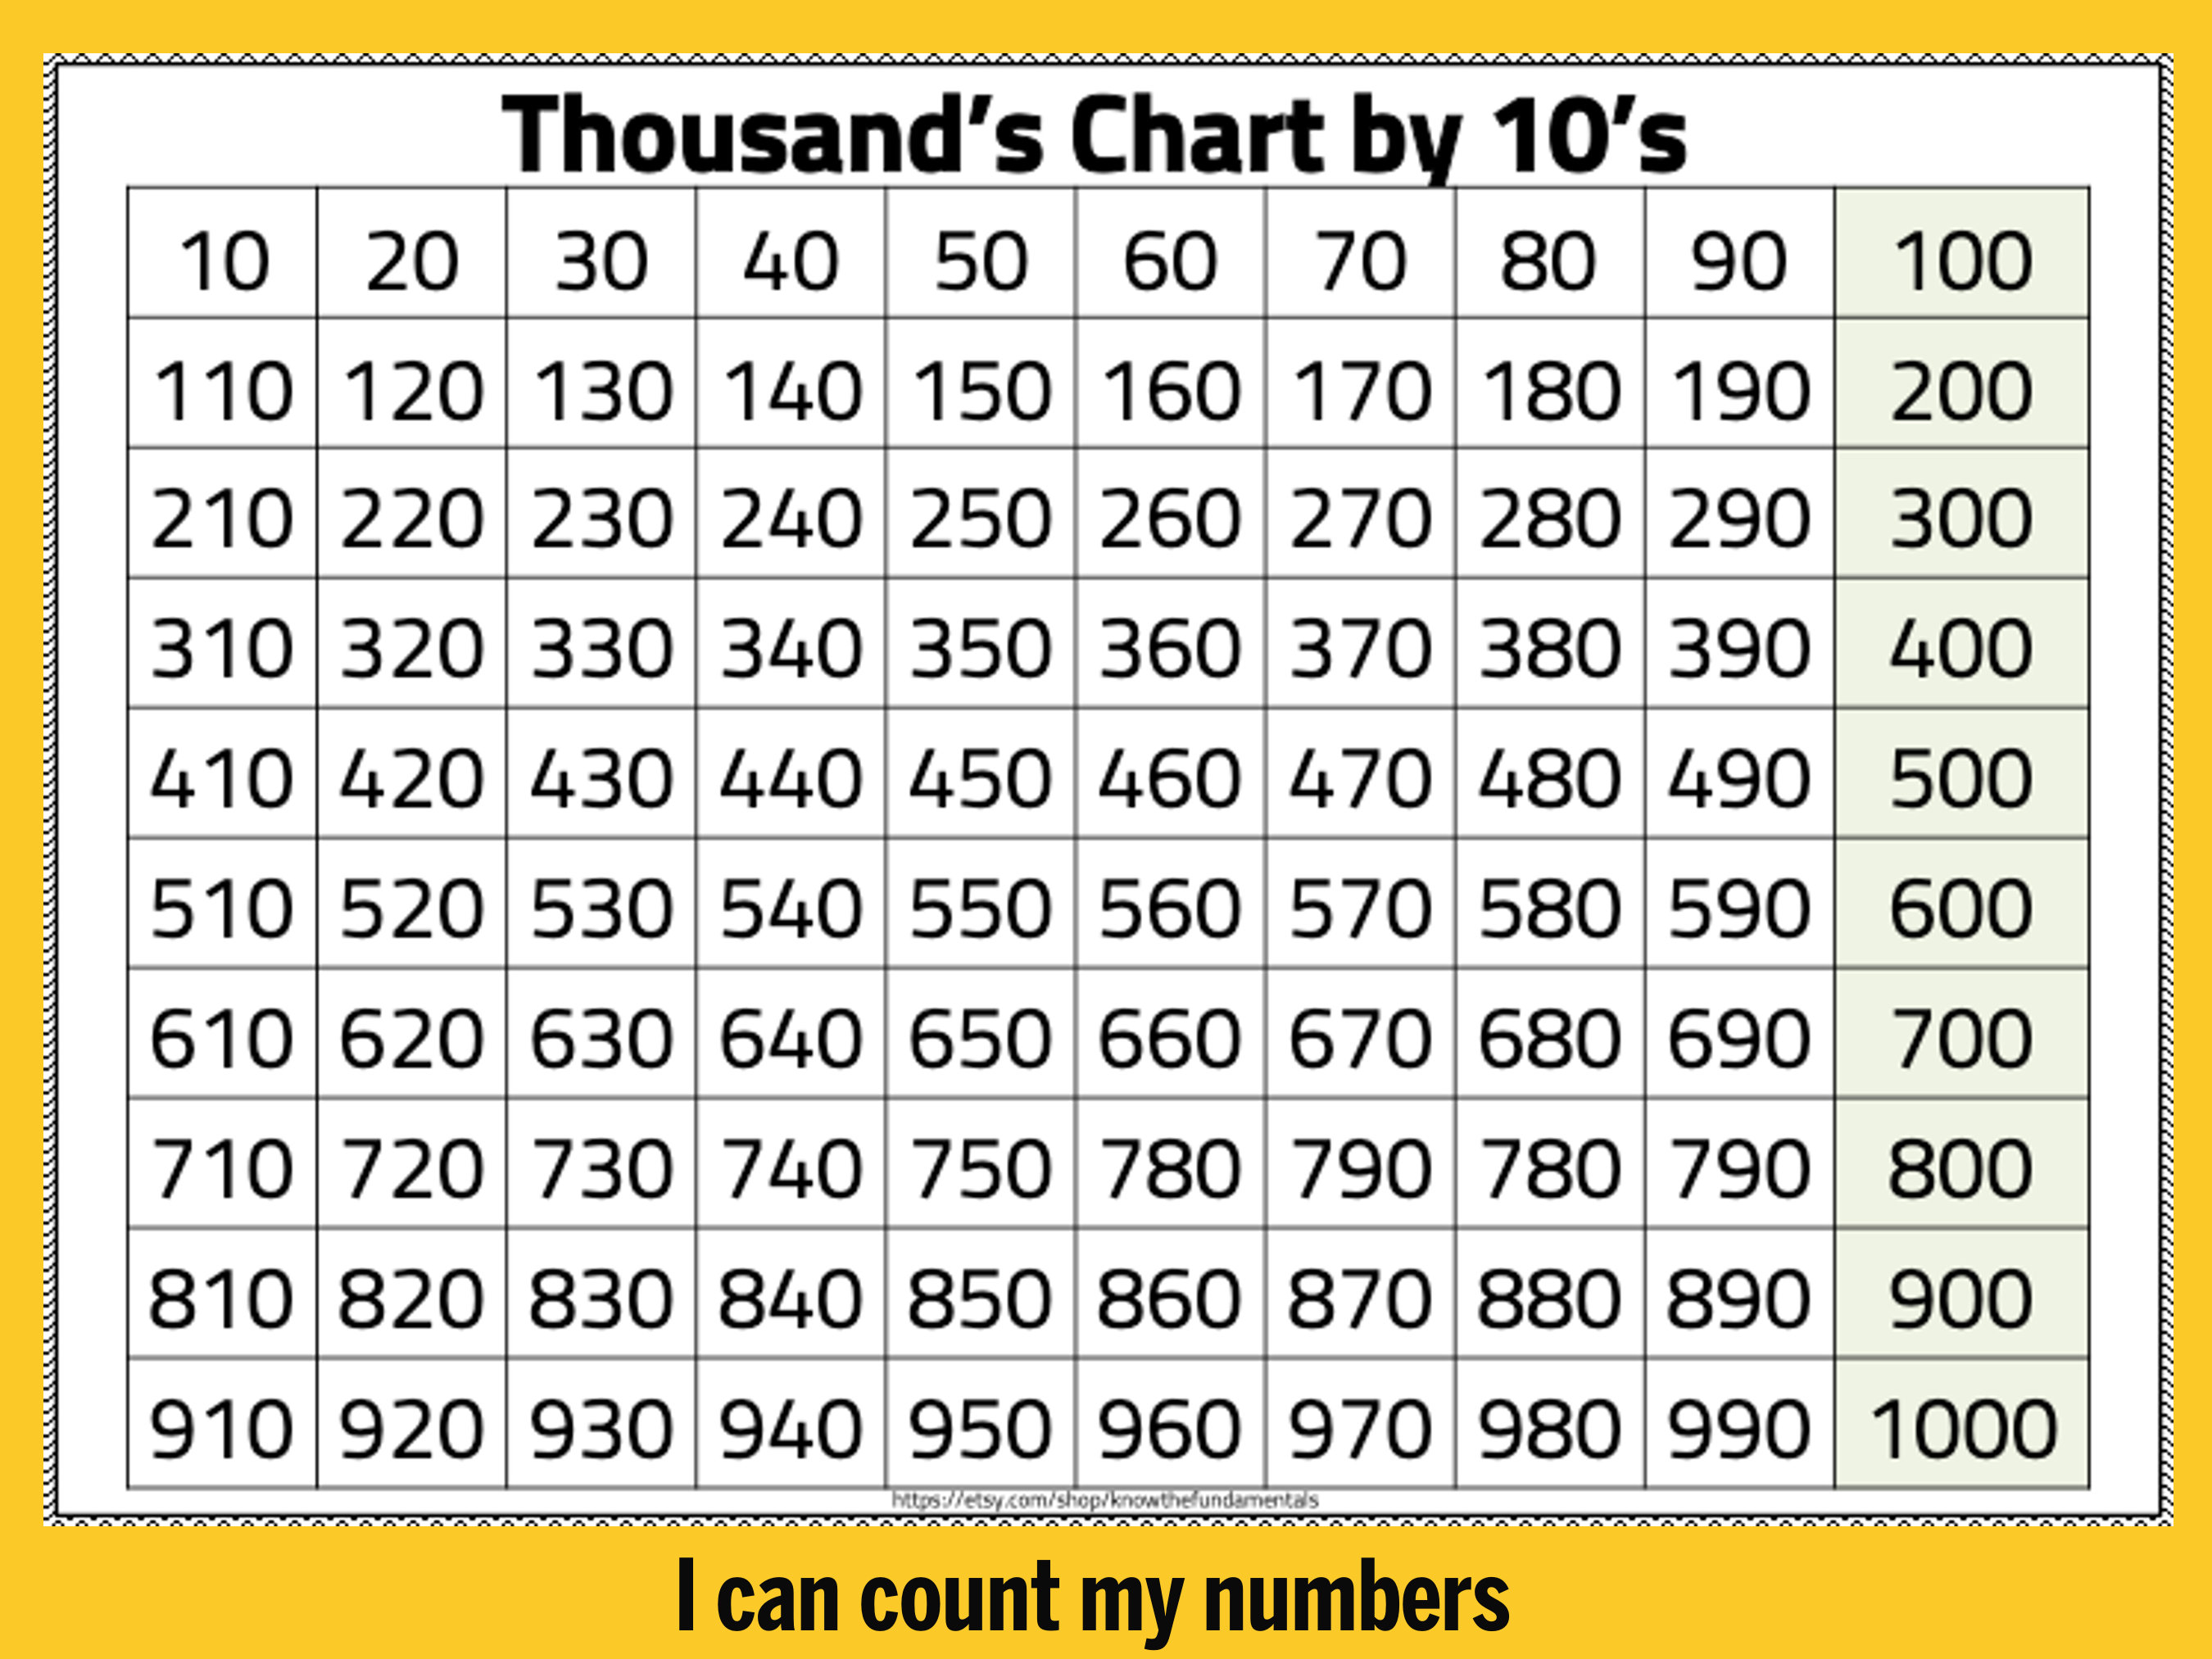 number-chart-1-1000-numbers-1-to-1000-chart-thousands-chart-by-10-s-hundred-chart-printable